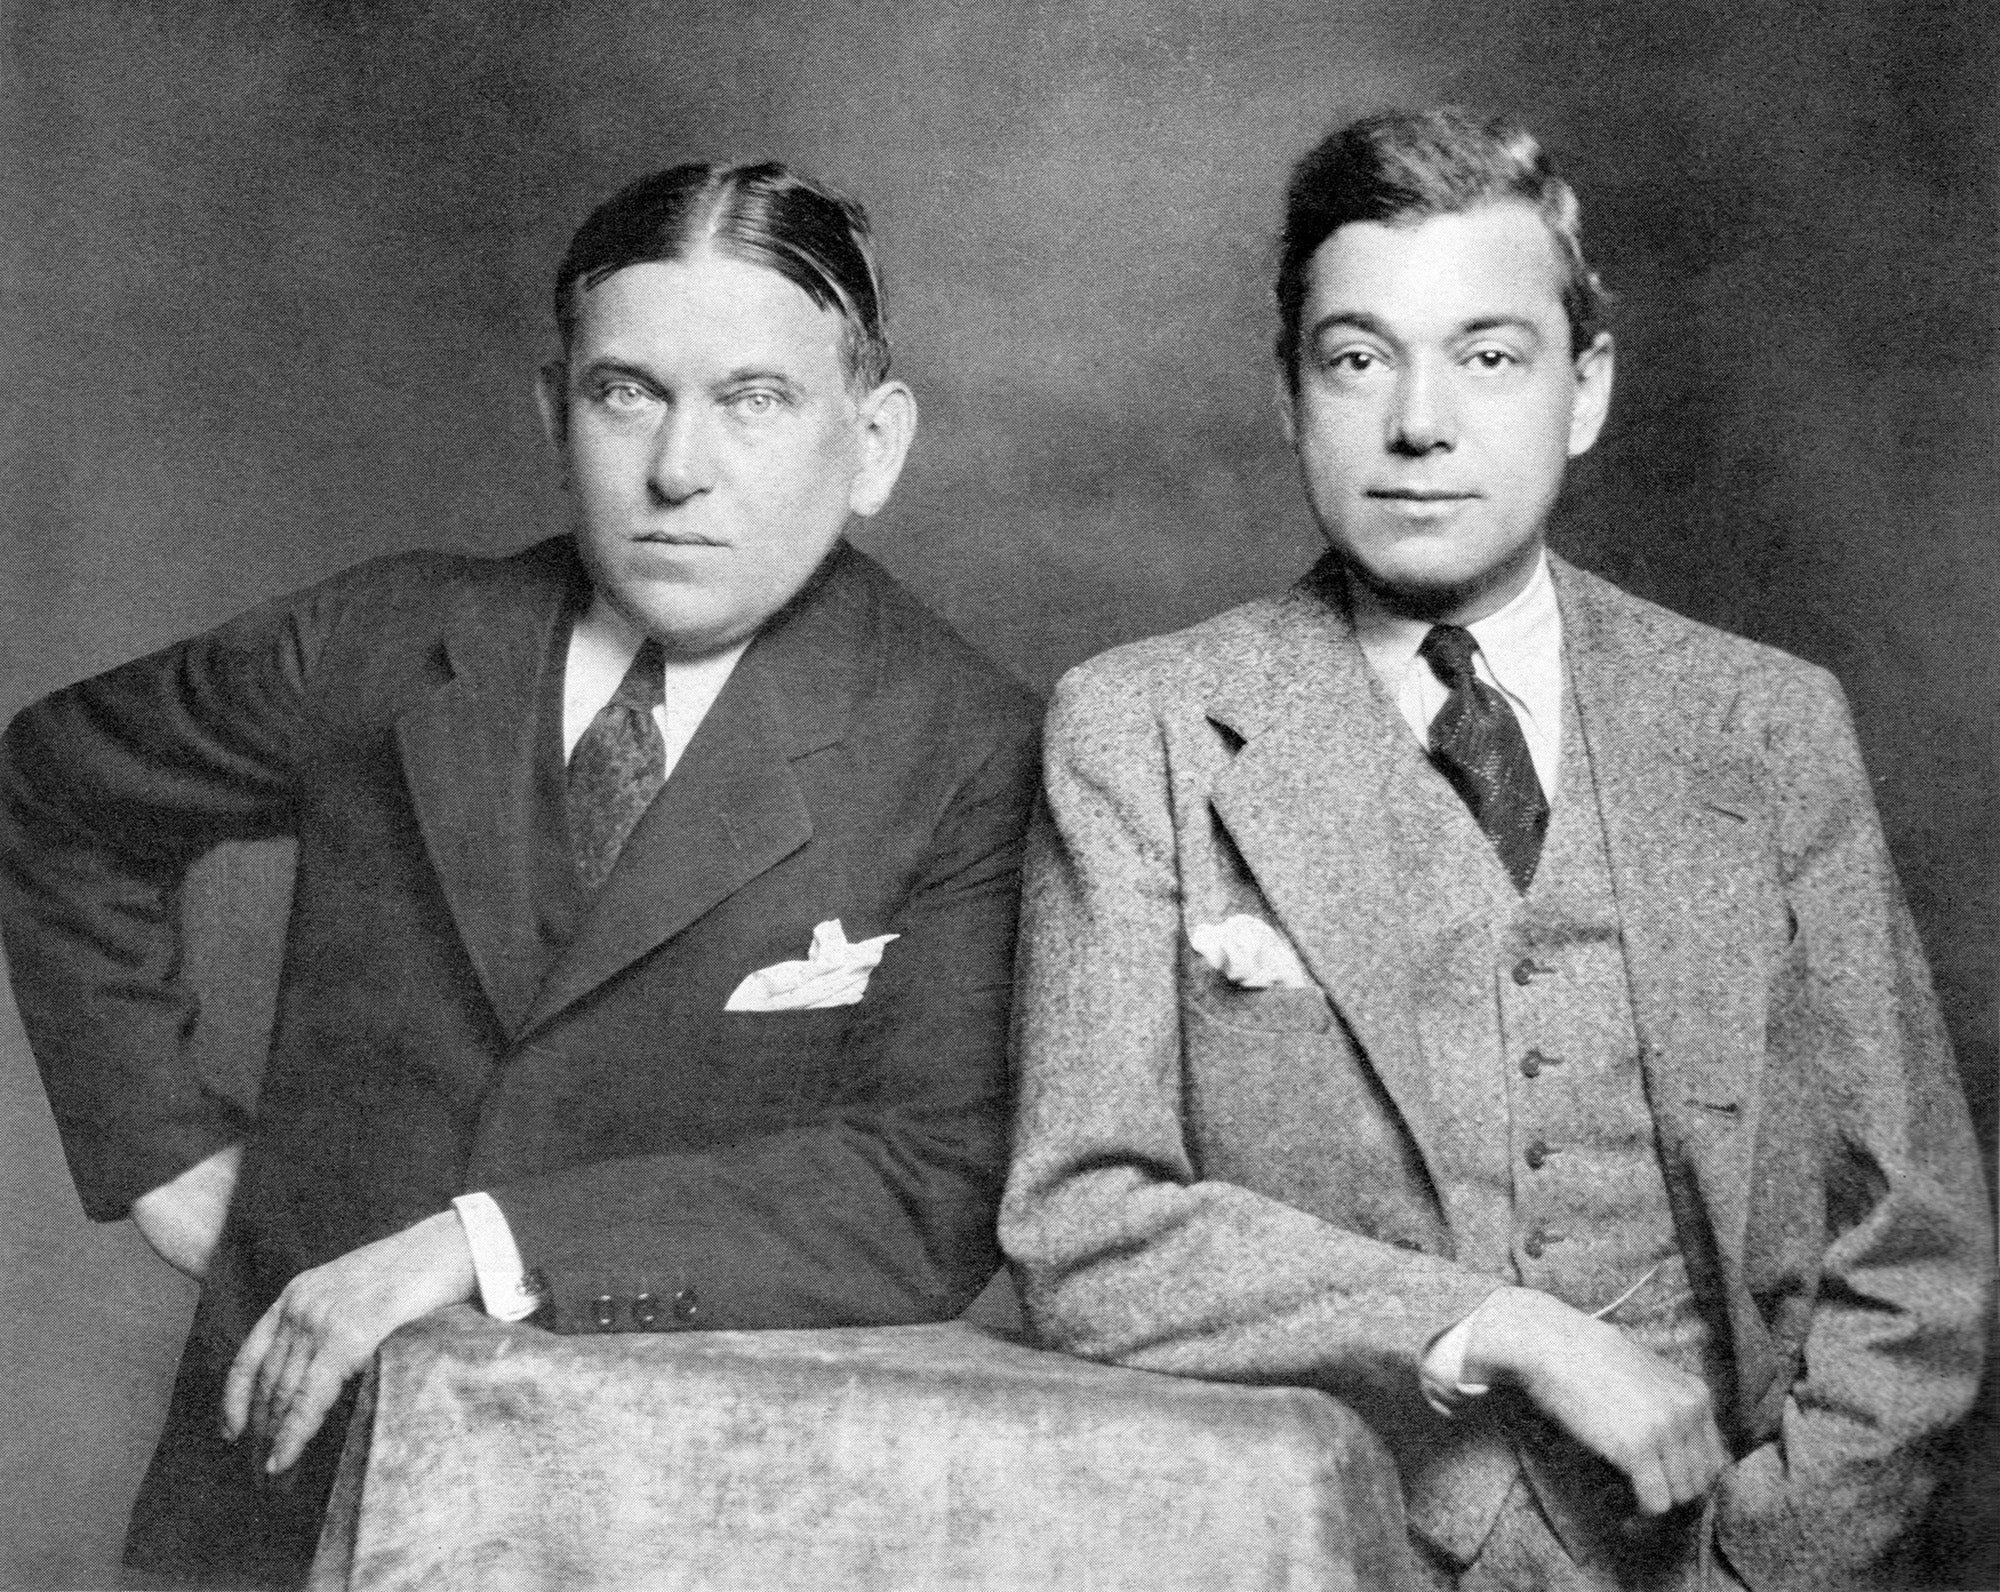 H. L. Mencken and George Jean Nathan